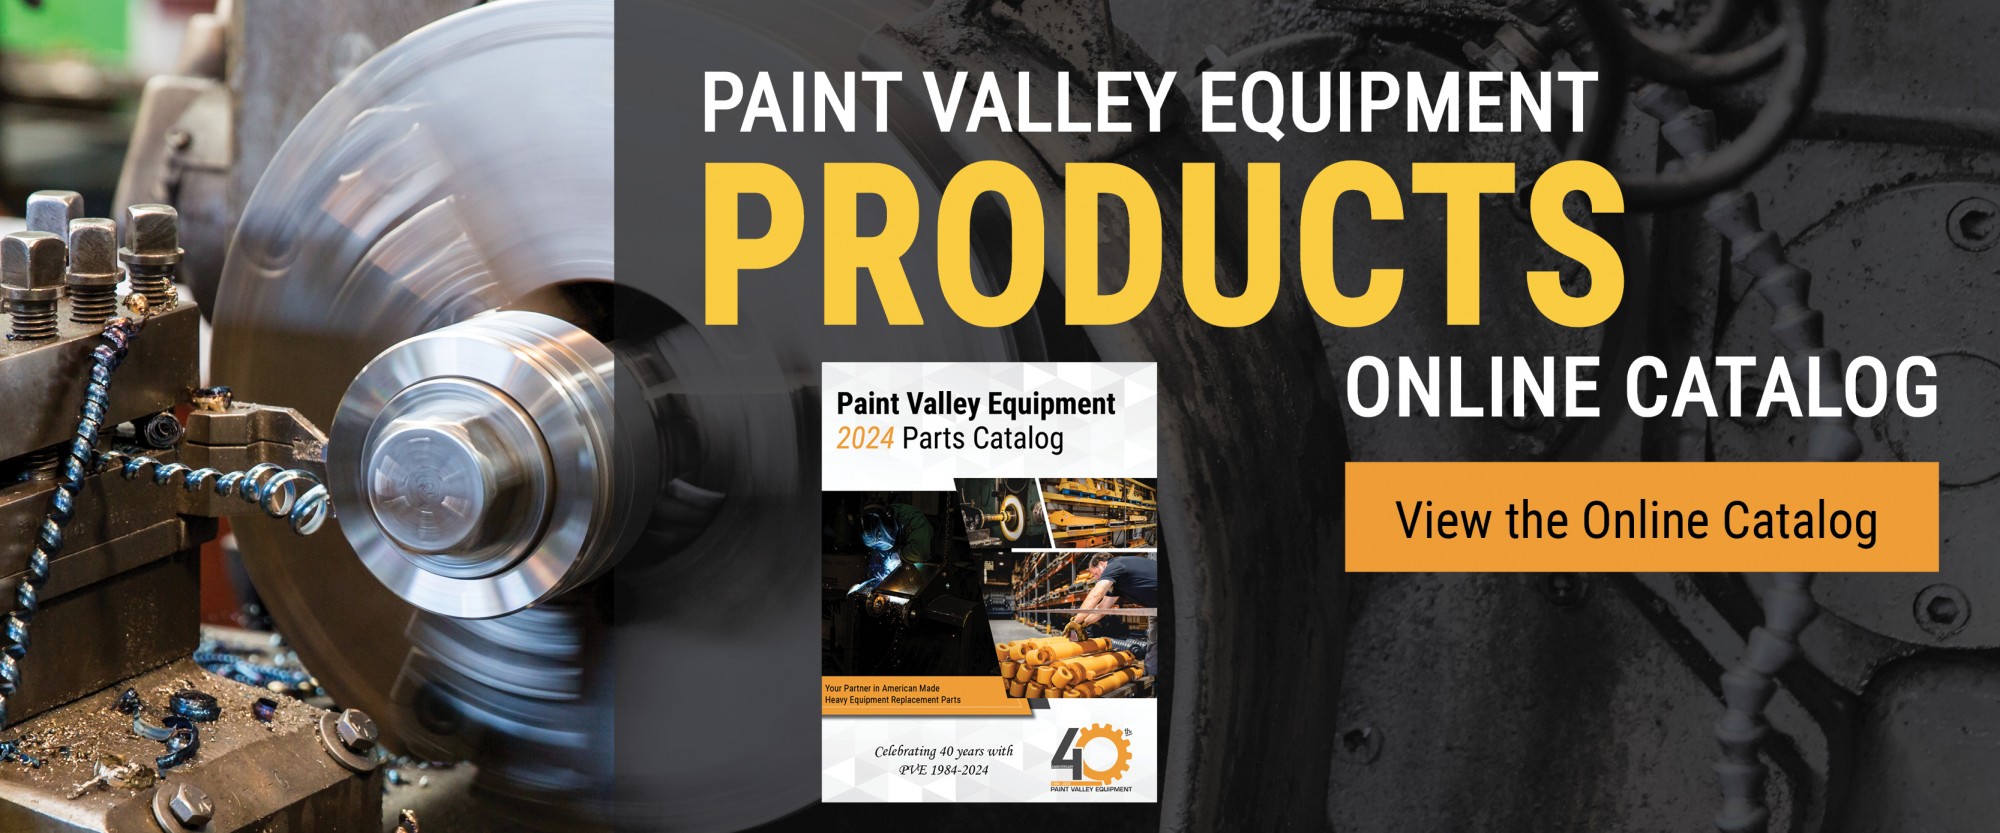 Paint Valley Equipment Products